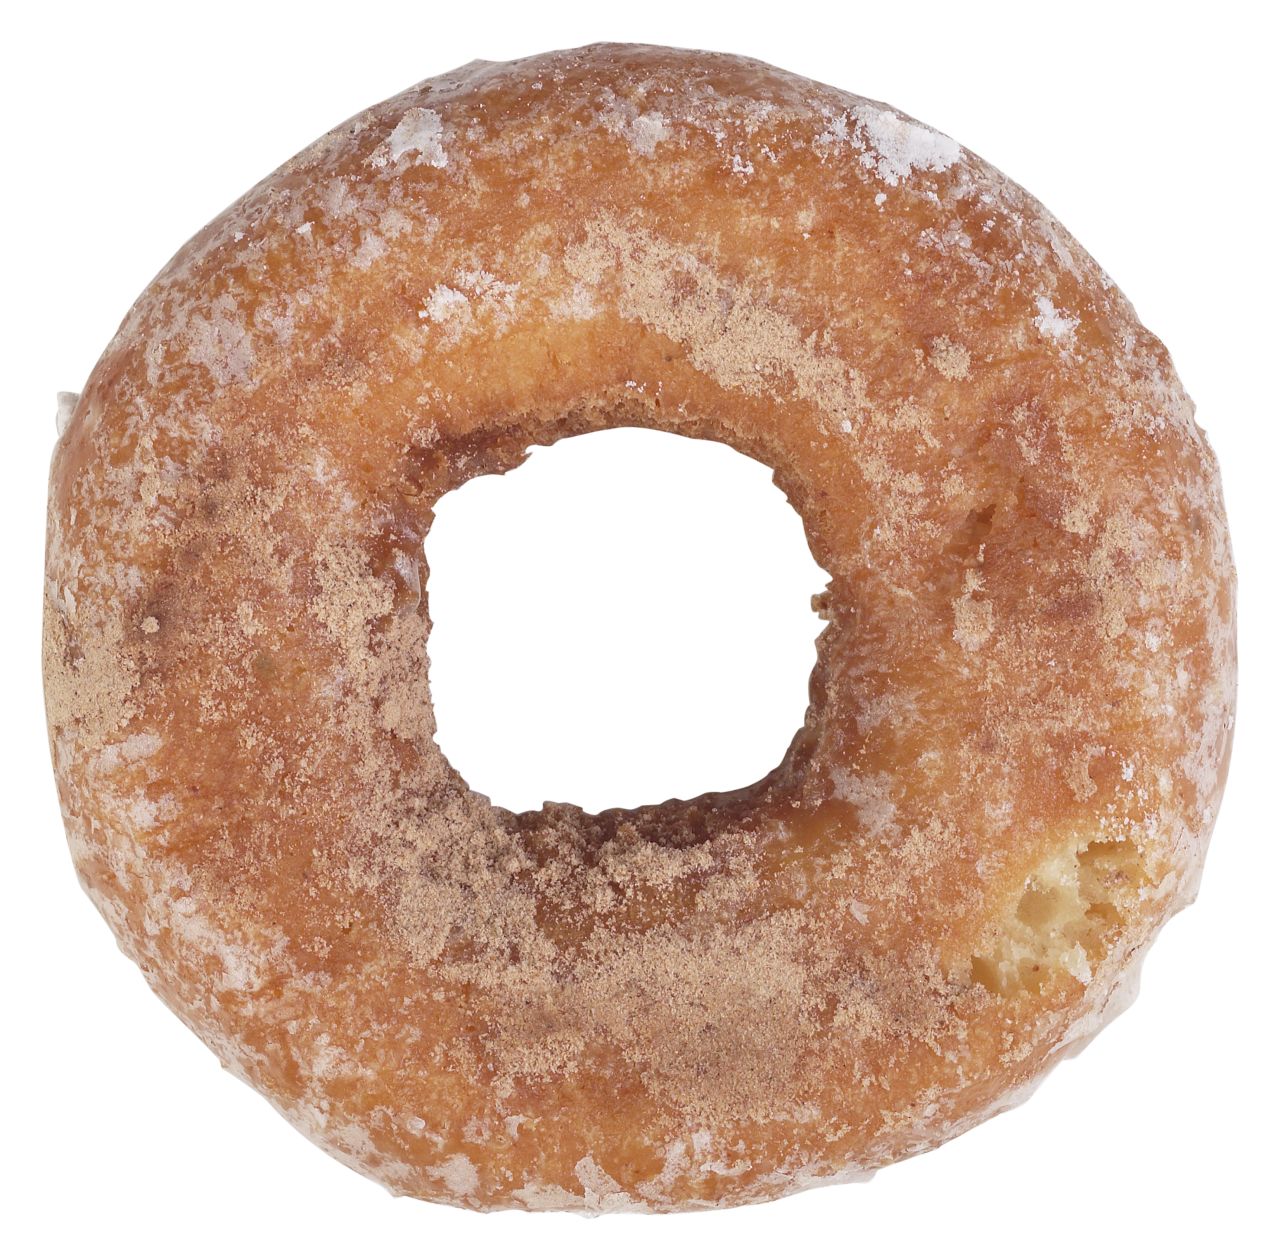 Food & Wine Magazine's Kate Krader declares that 2013 was the year of the doughnut, with hybrids and knockoffs of signature items abounding -- but that's not the "hole" story. See the best and worst of the food world this year.